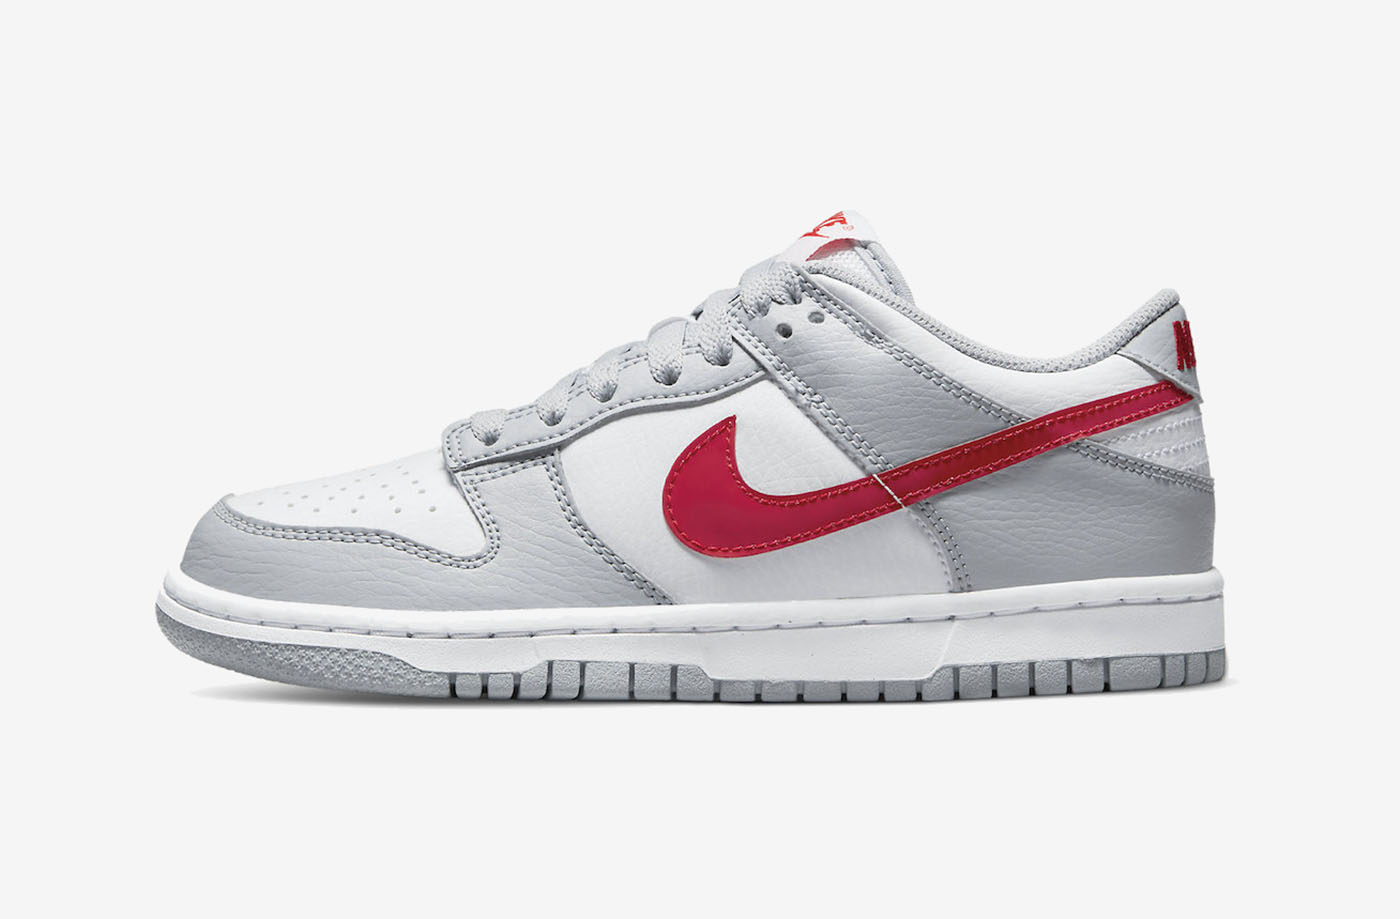 Nike Dunk dunk low free Low GS White/Grey/Red Release Date | SoleSavy